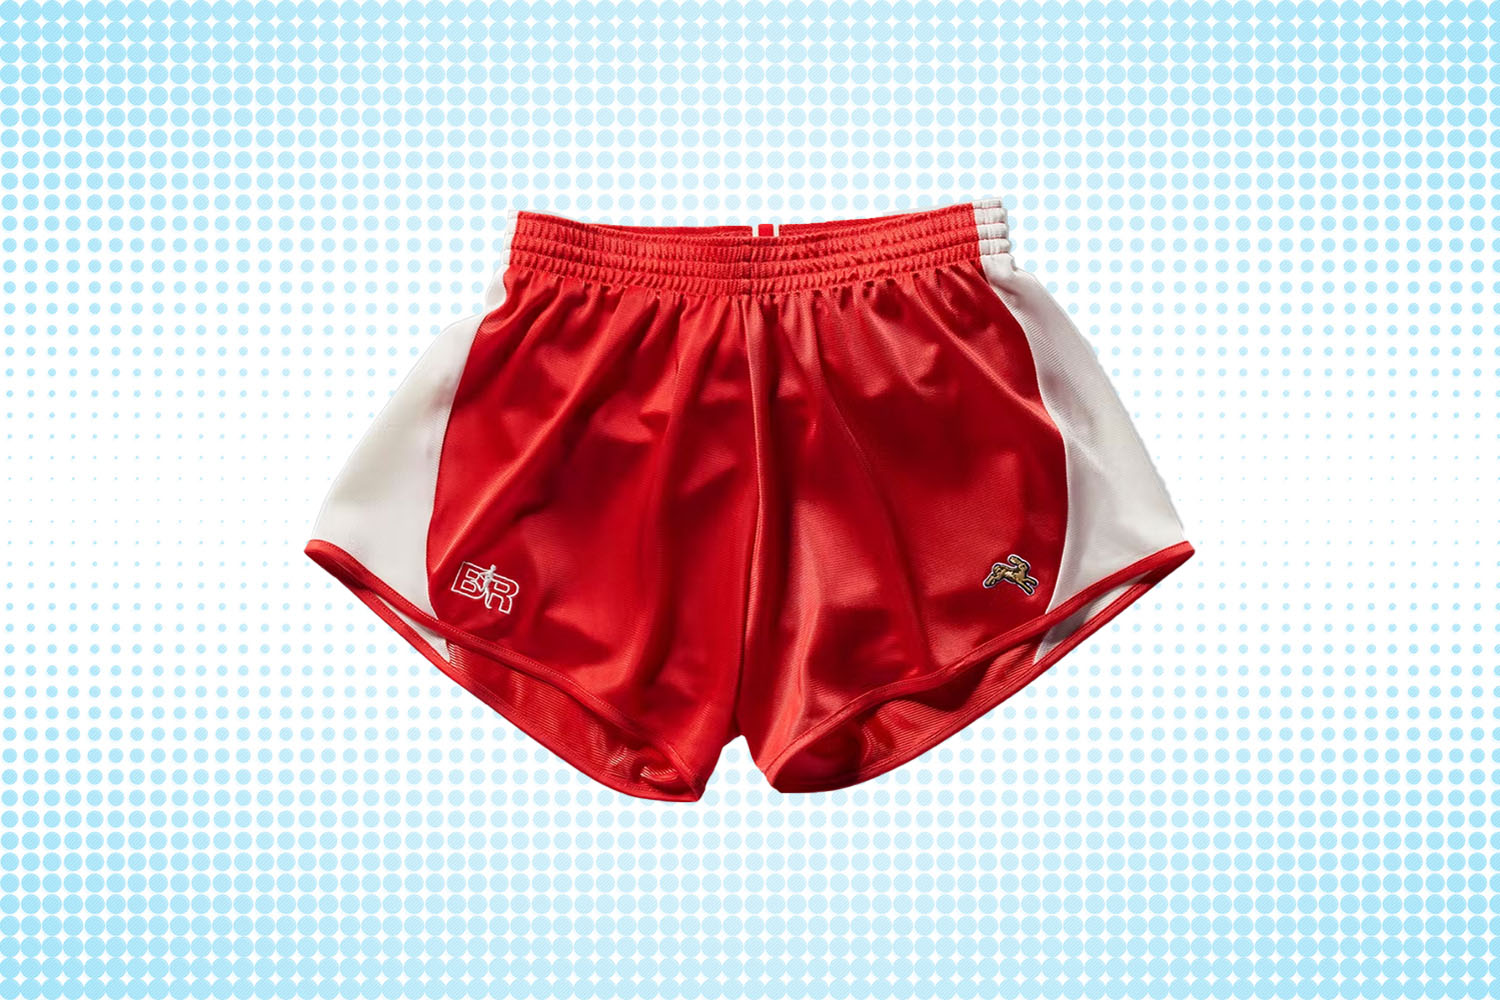 a pair of two-toned white-and-red shorts from Tracksmith on a white and blue dotted background